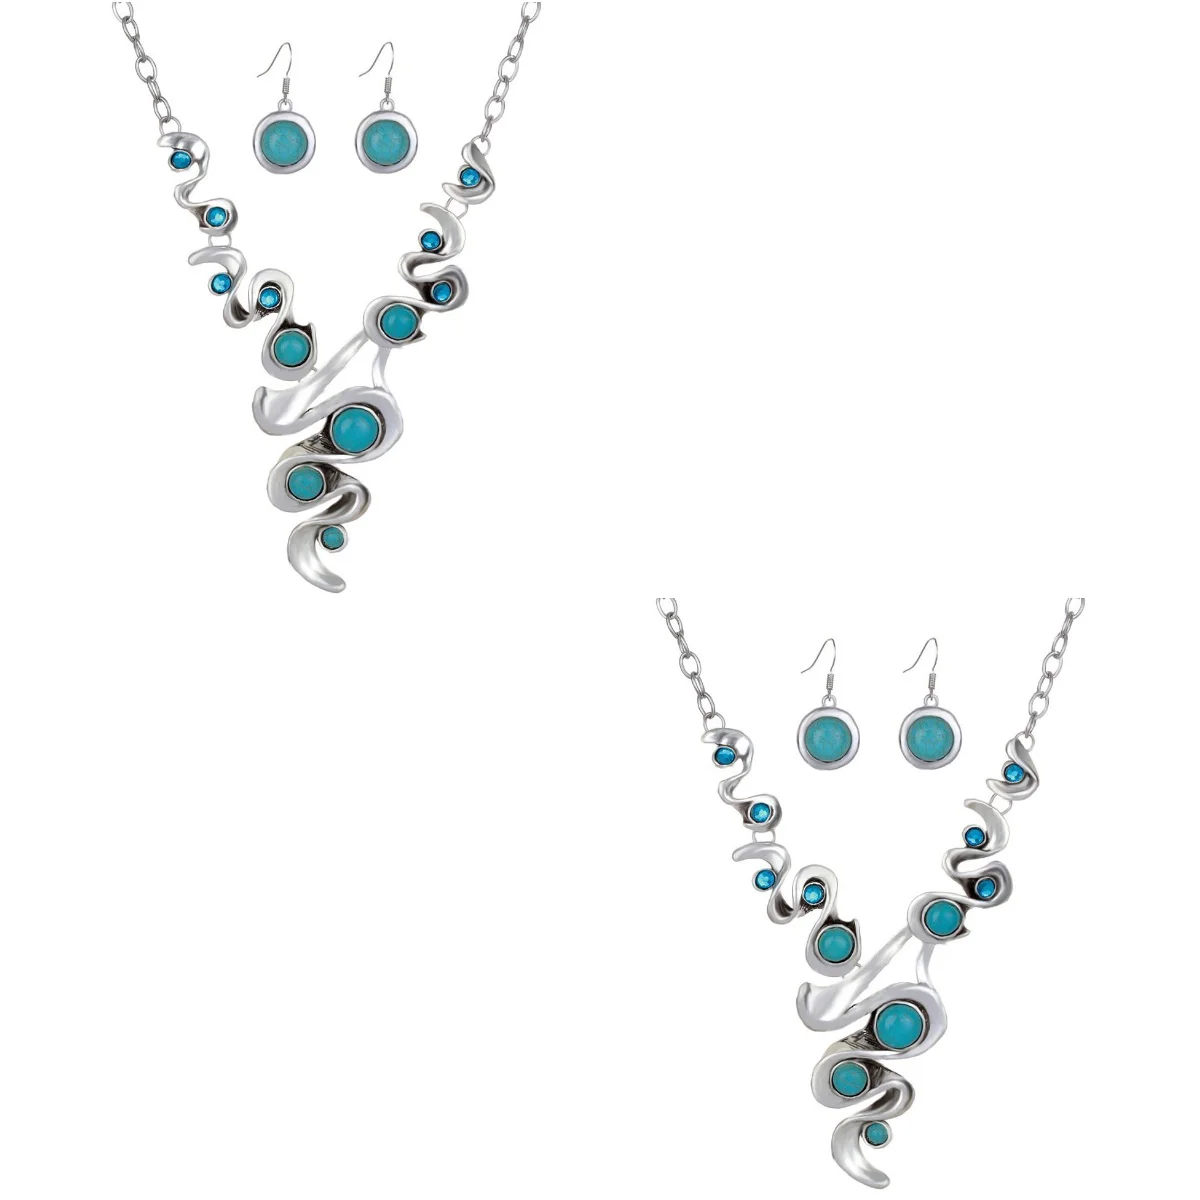 

2 Sets Necklaces Turquoise Jewelry Women Accessories Unique Delicate Earrings Bohemia Bohemian Miss